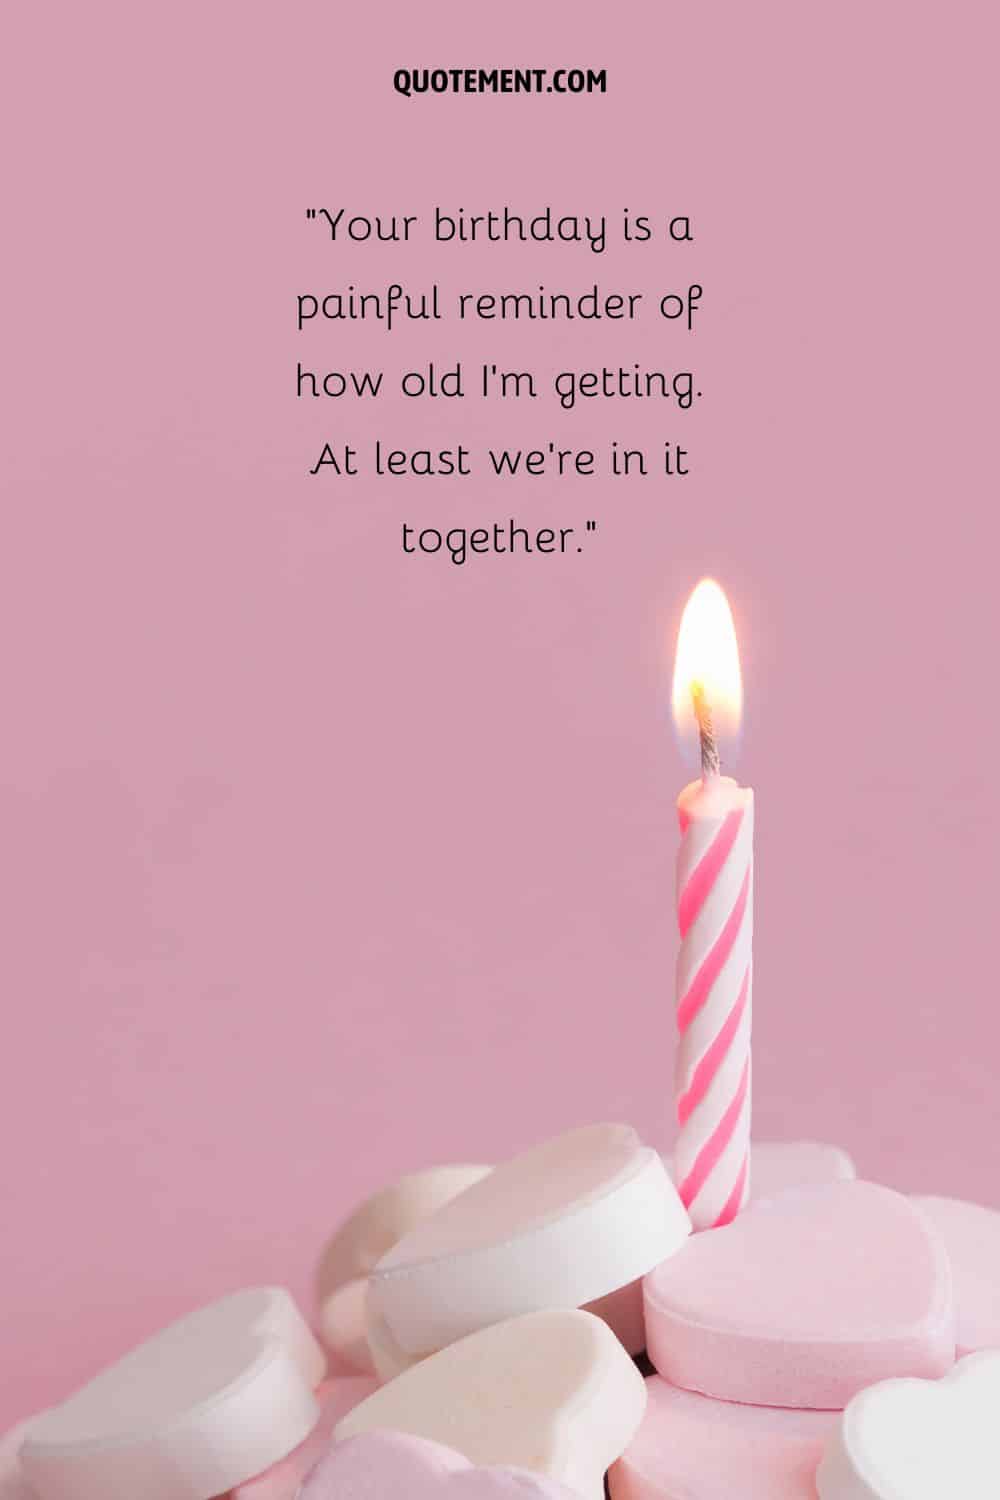 image of a small birthday candle representing a funny 66th birthday wish